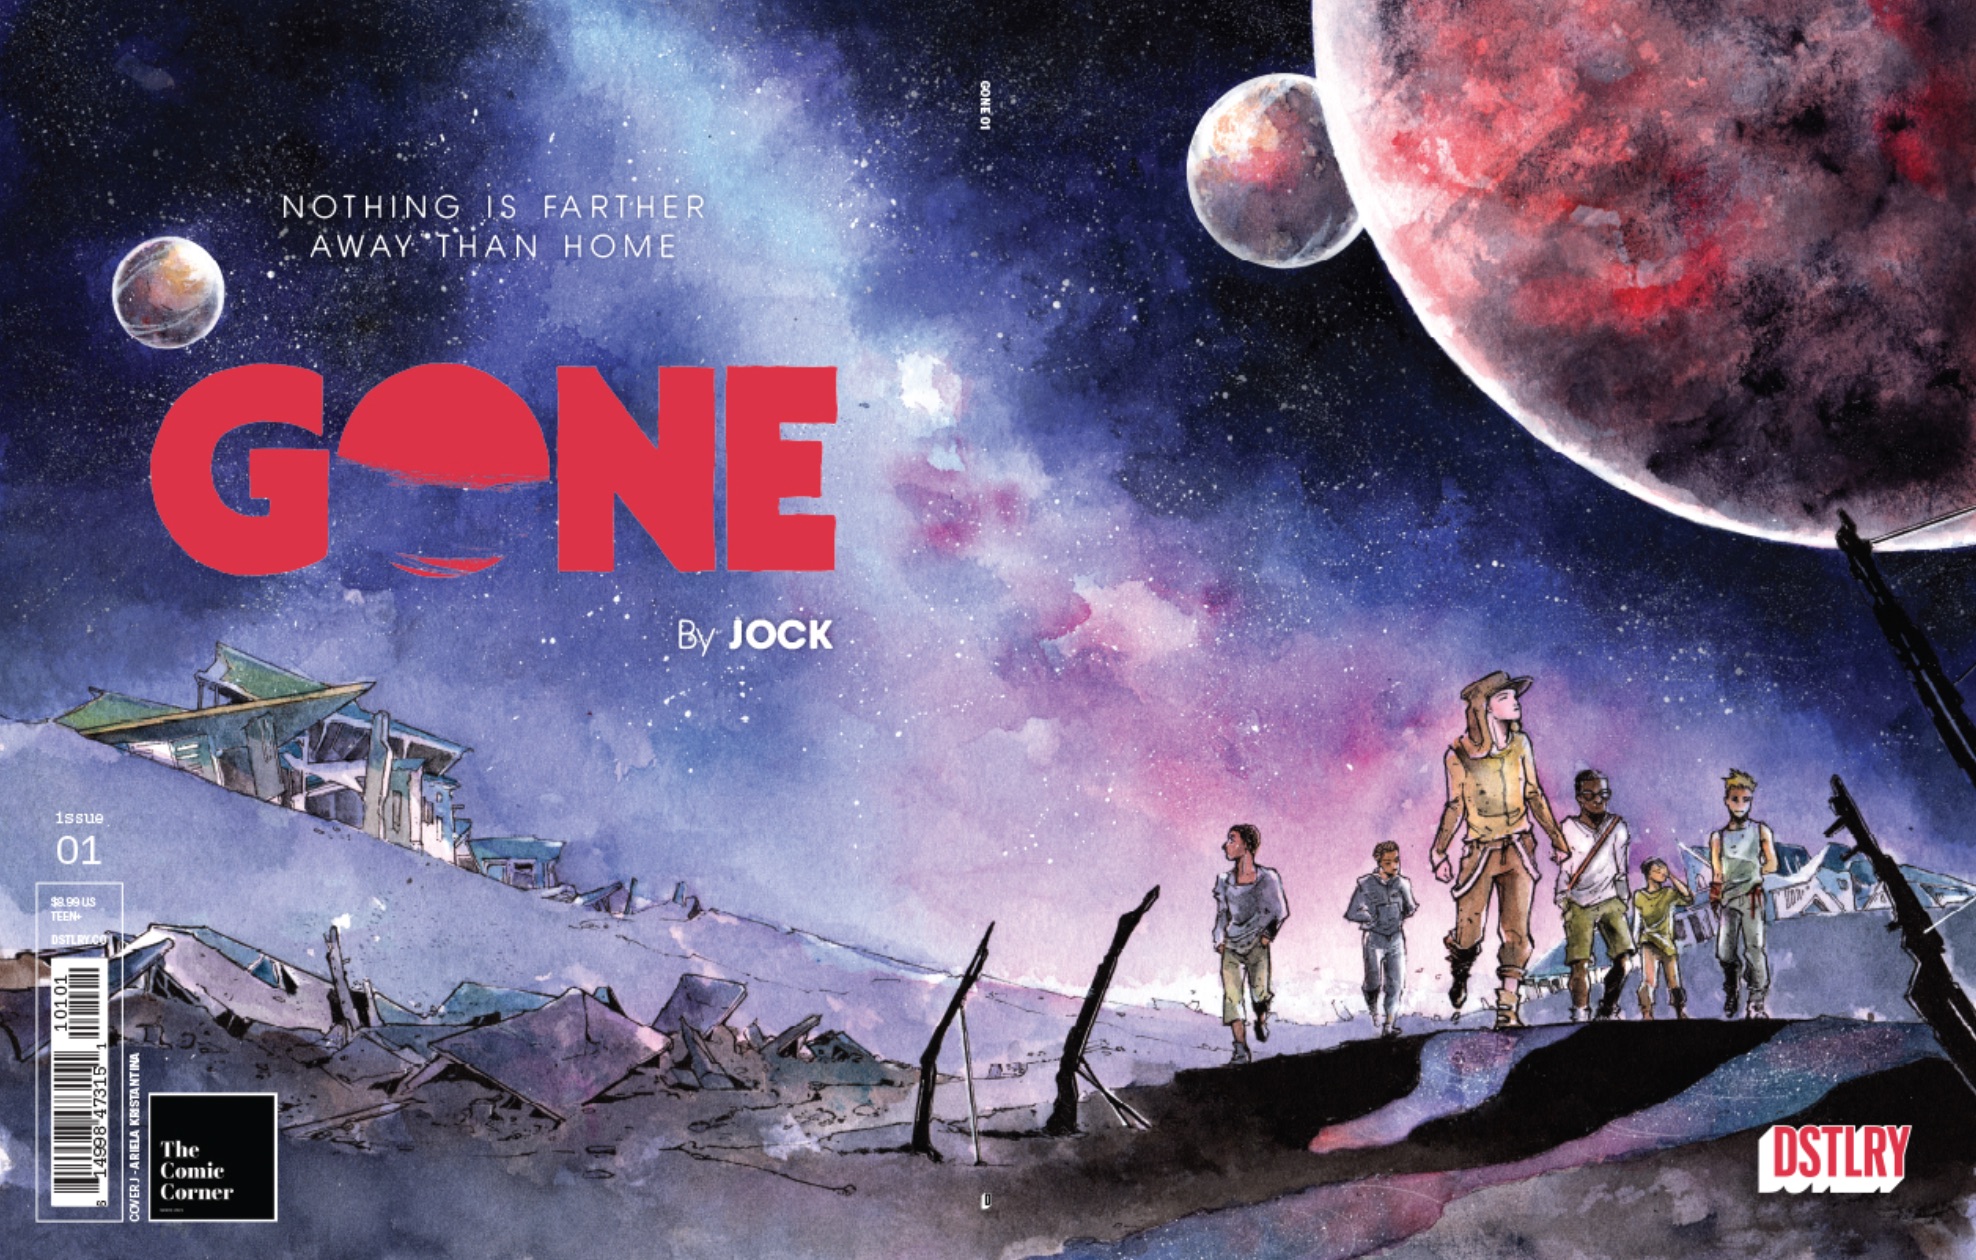 six young people explore ruins on an alien planet under a starry sky beneath a red title reading 